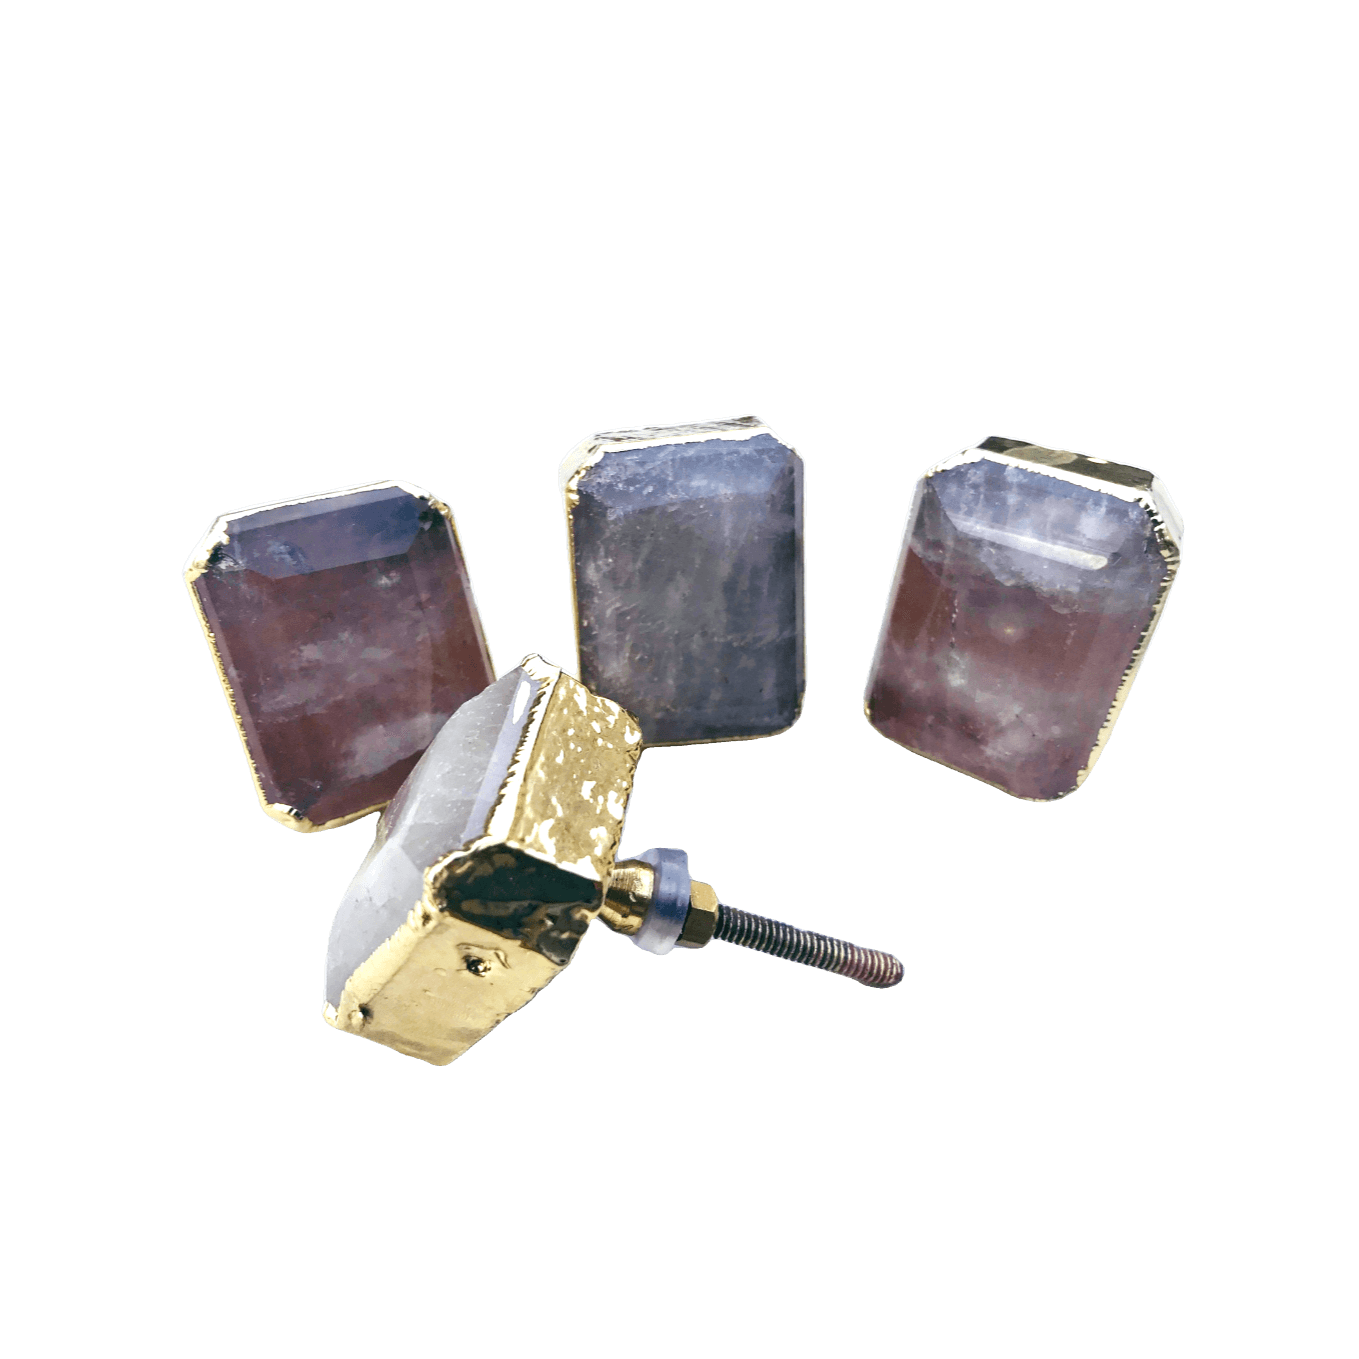 Faceted Clear Quartz Cabinet Door Pull Handle - Set of 4 - MAIA HOMES